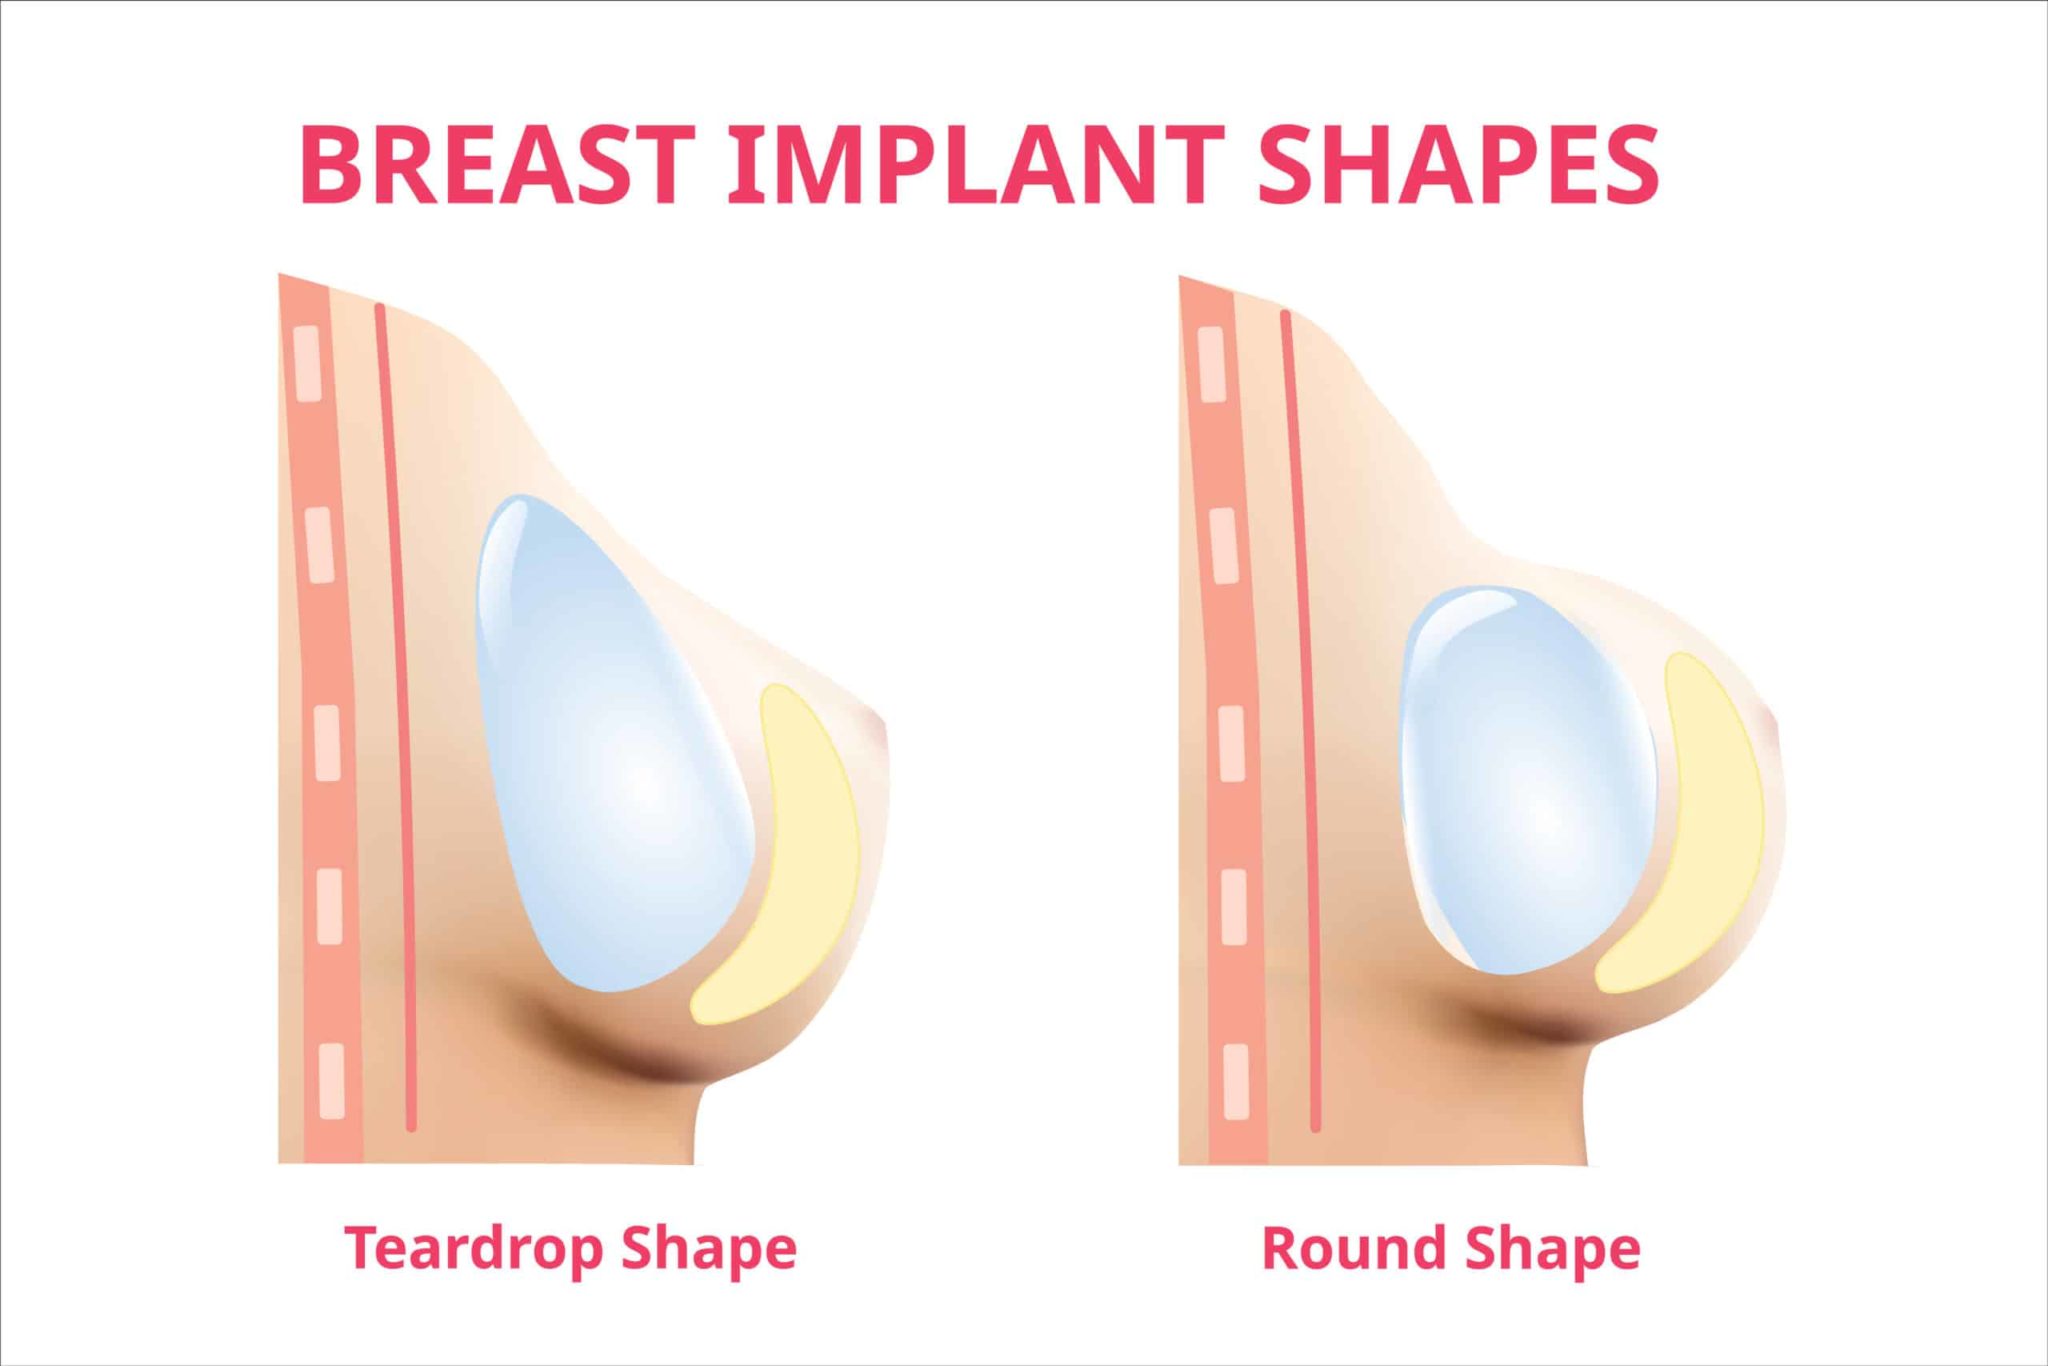 Teardrop vs round breast implants: what's the difference? - Harley Medical  Group